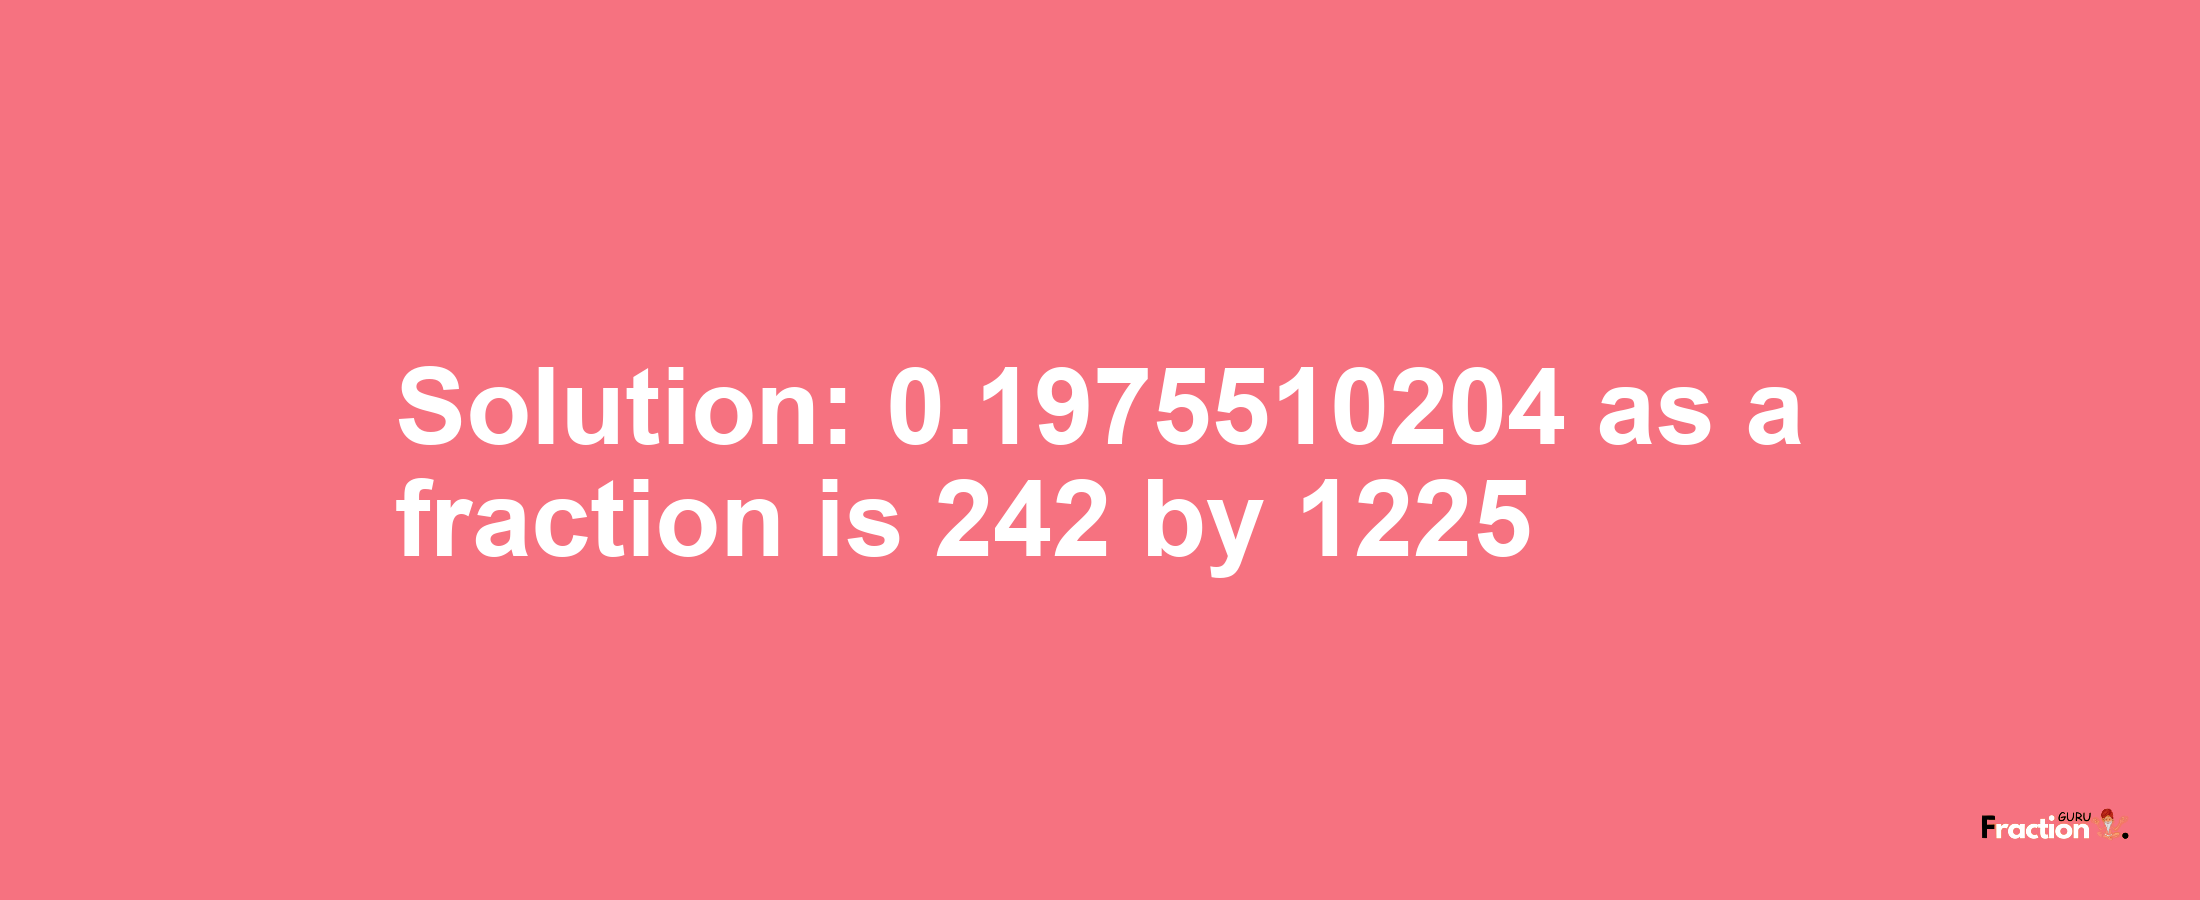 Solution:0.1975510204 as a fraction is 242/1225